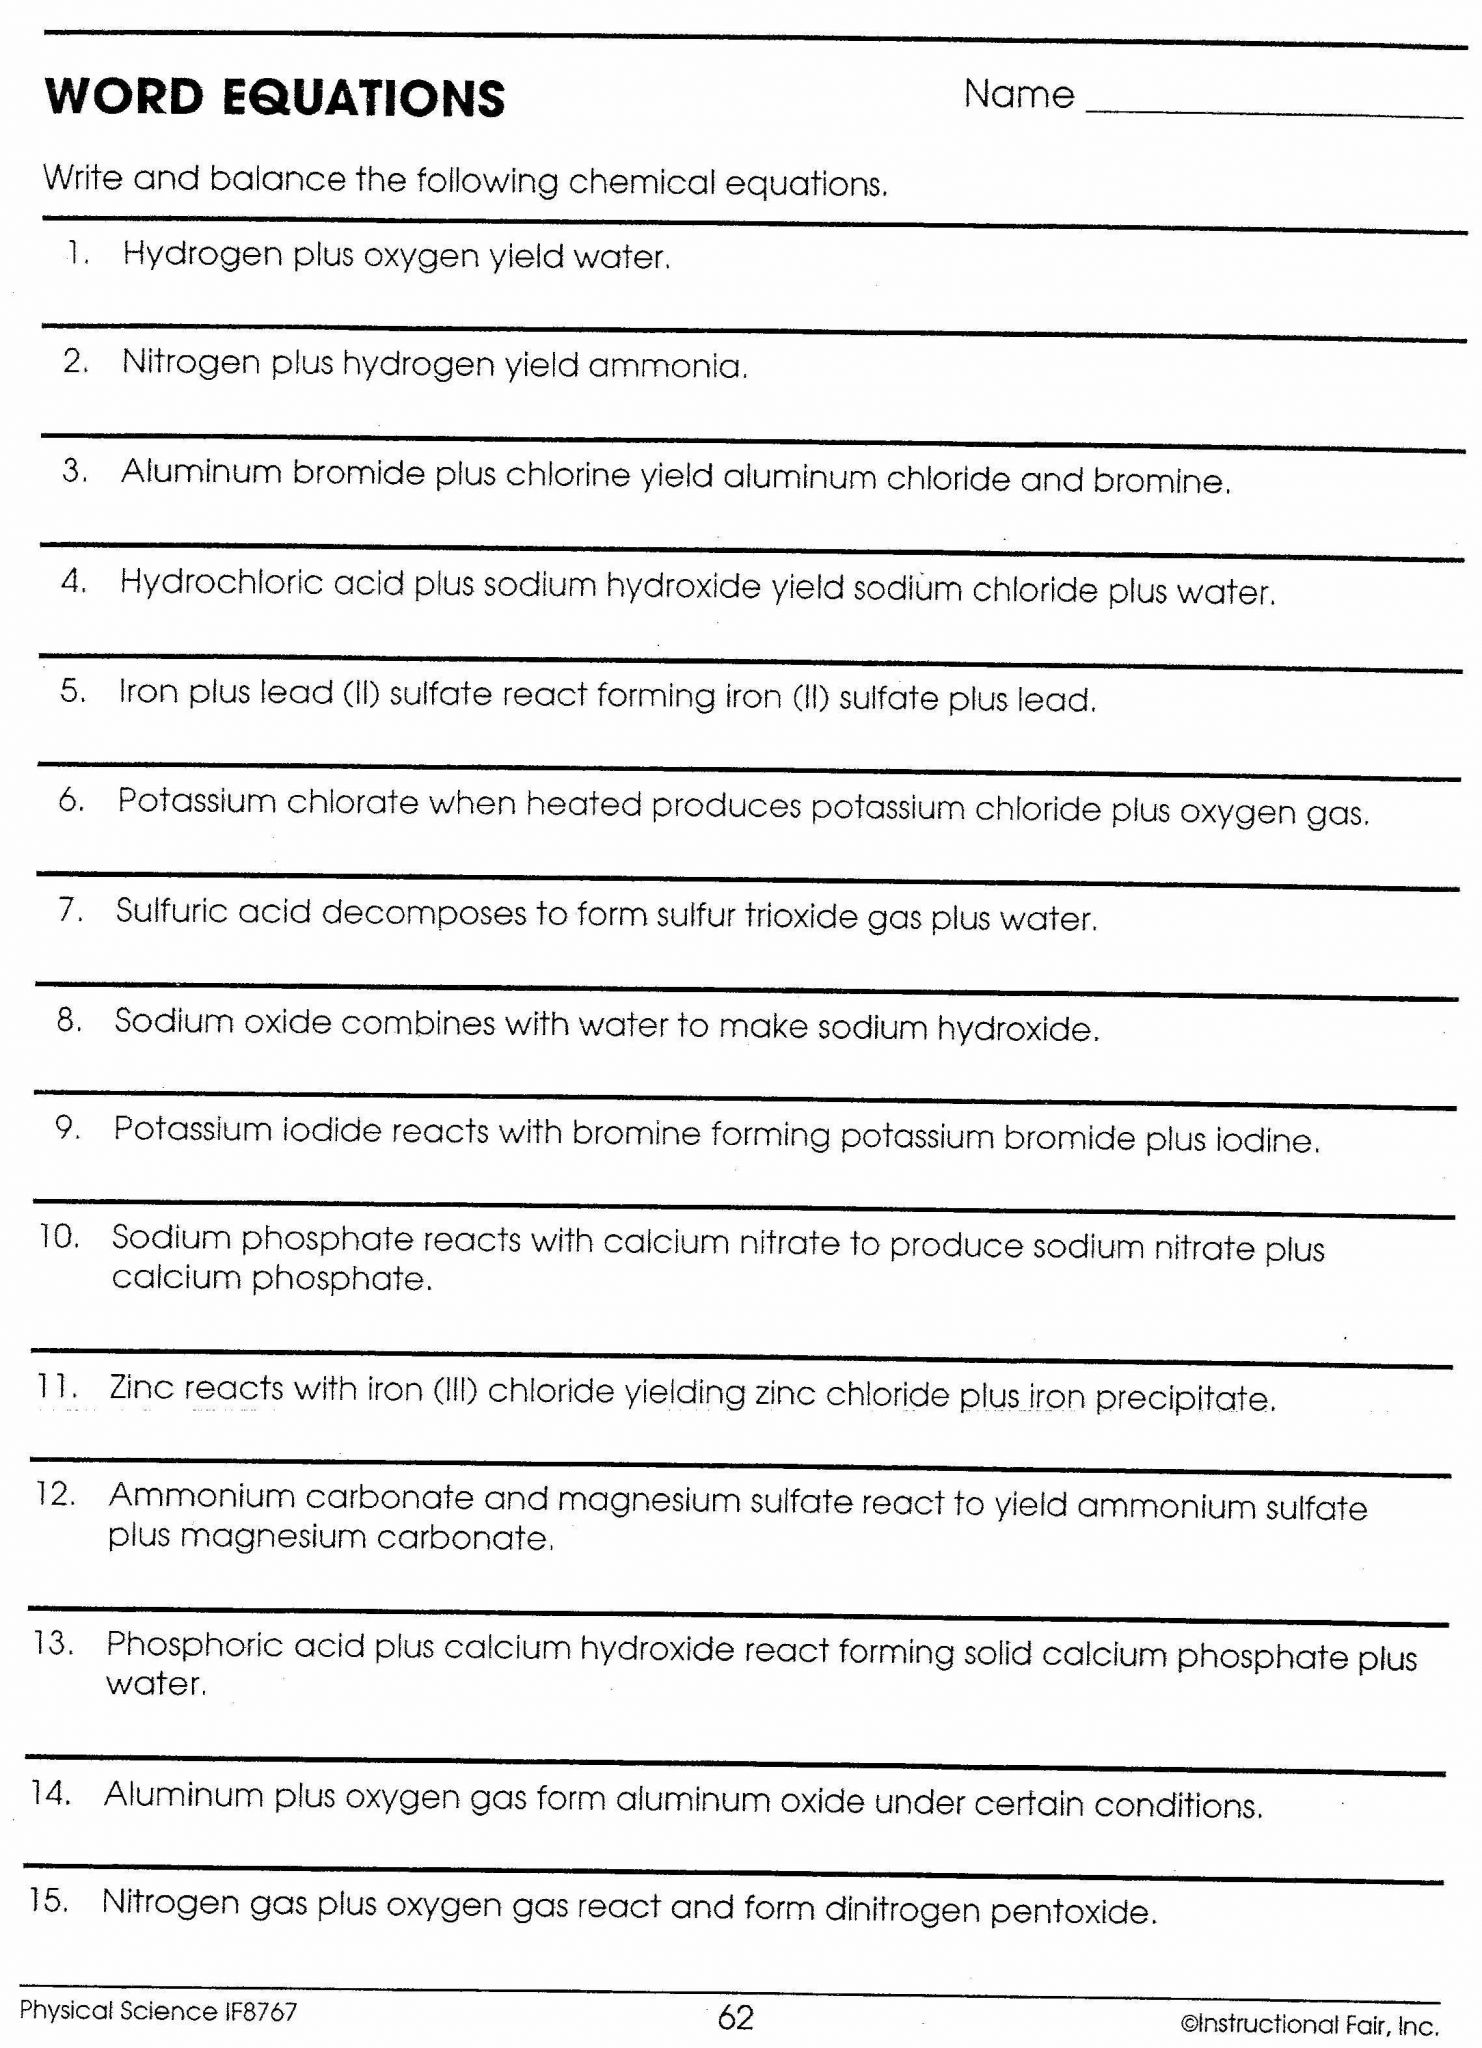 Systems Of Equations Worksheet Answers Along with More Word Equations Worksheet Save Worksheet Word Equations